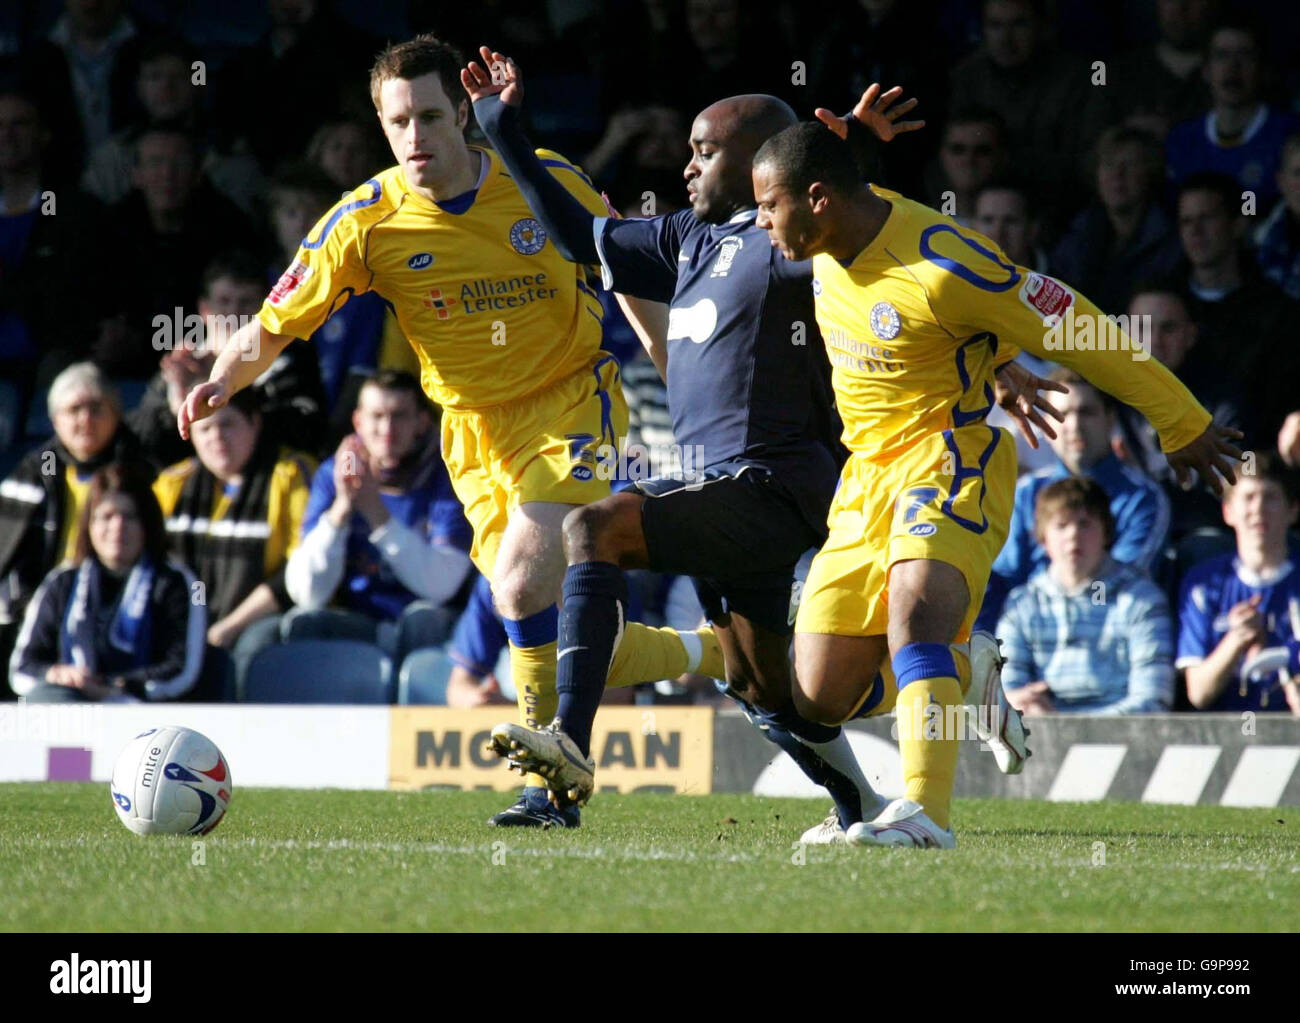 Leicester's Alan Maybury (left) and Southend's Jamal Campbell-Ryce (centre) battle for the ball during the Coca-Cola Football League Championship match at Roots Hall, Southend-on-Sea. Stock Photo